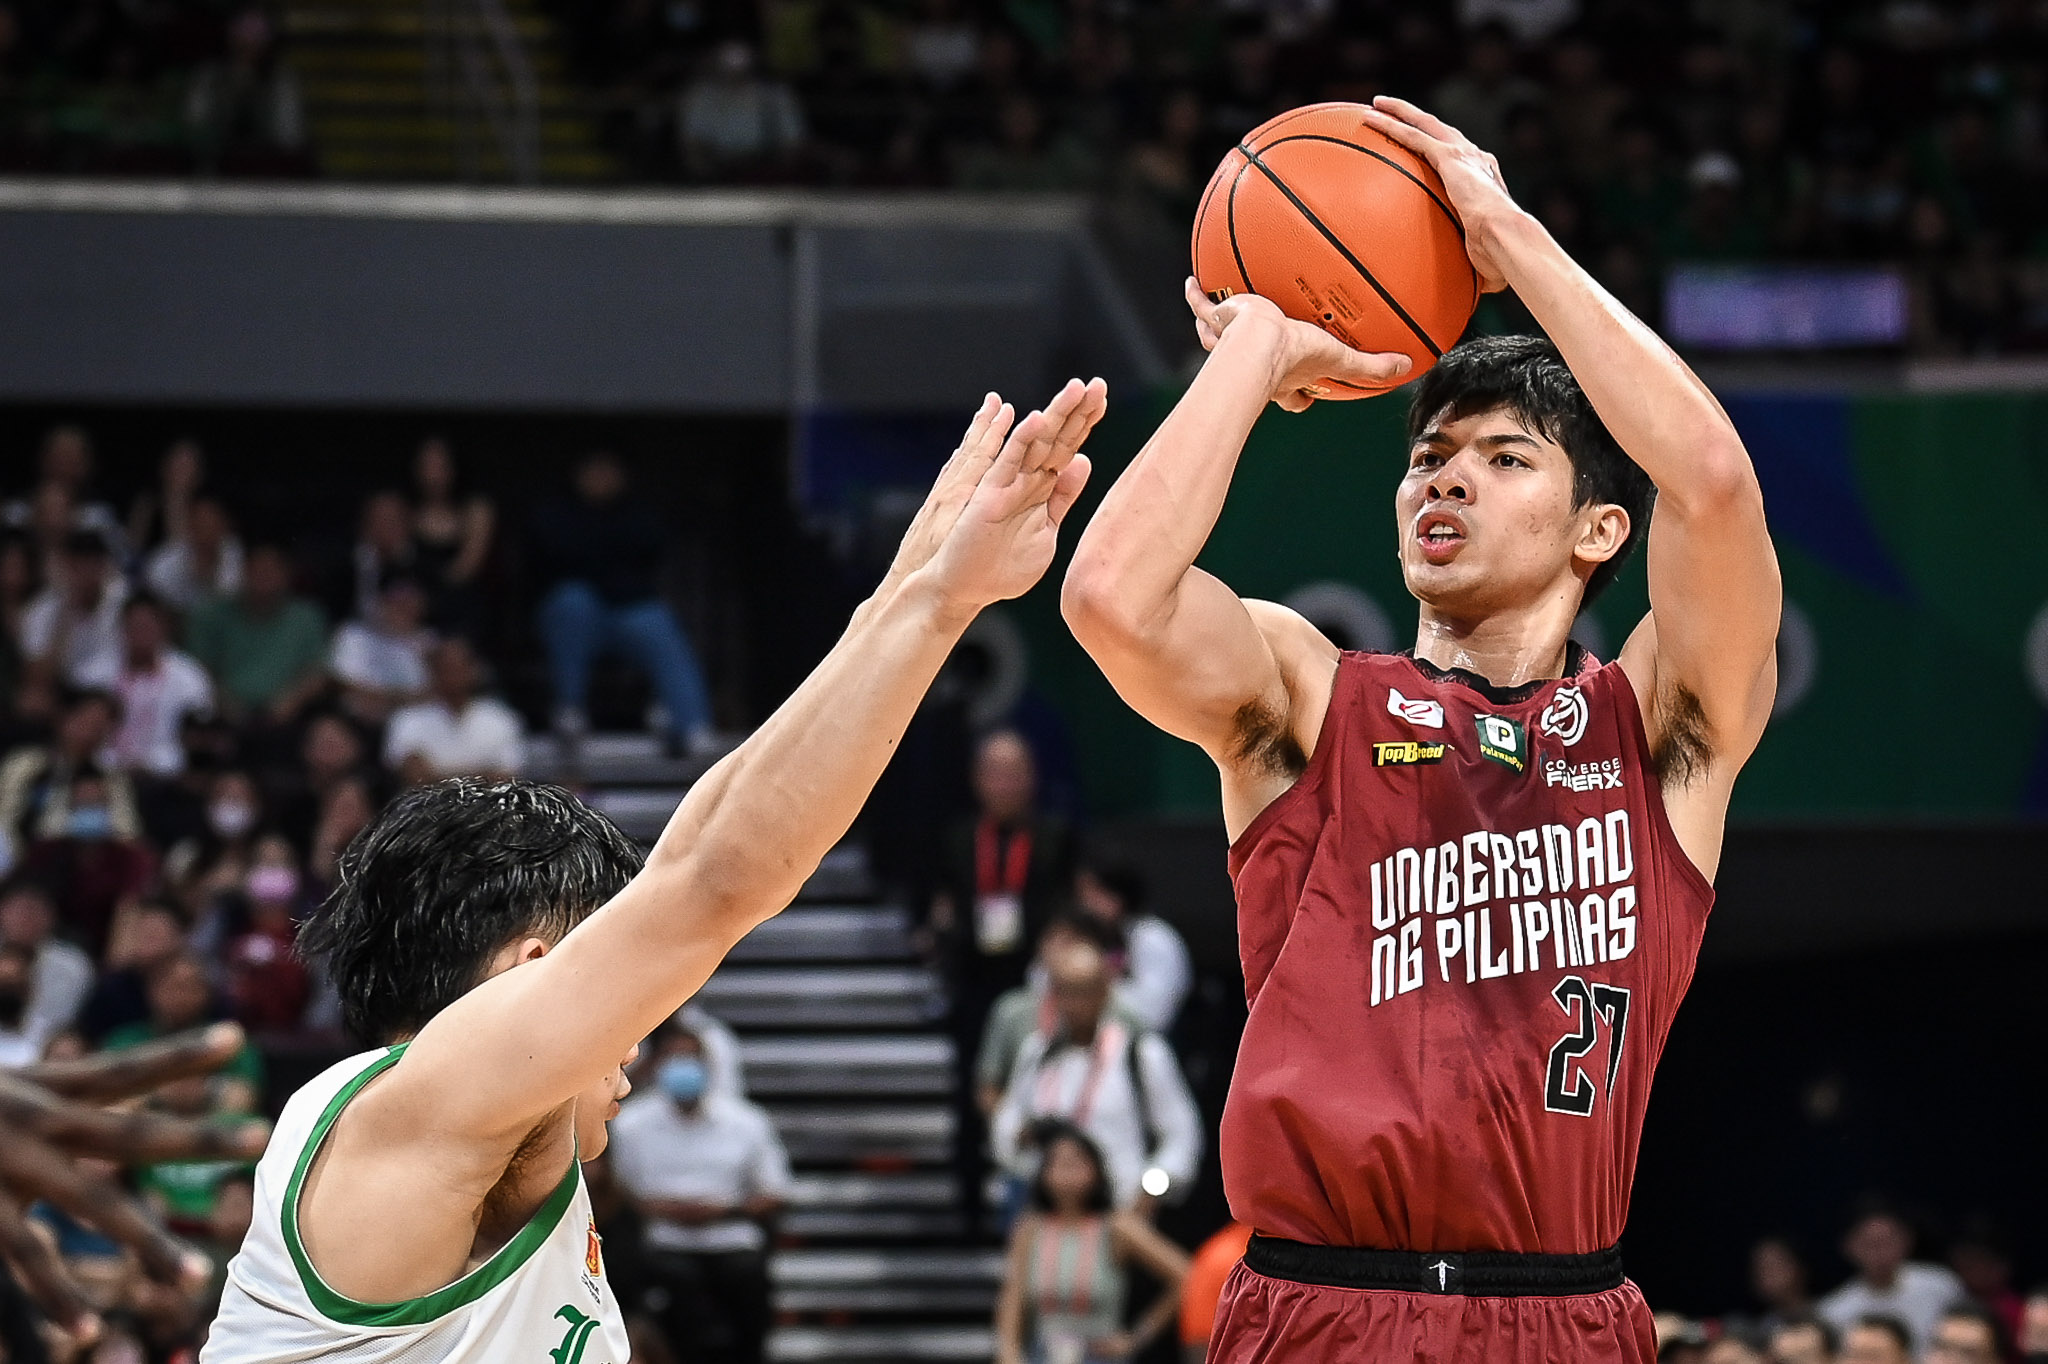 UP denies La Salle late comeback to stay unbeaten at 6-0